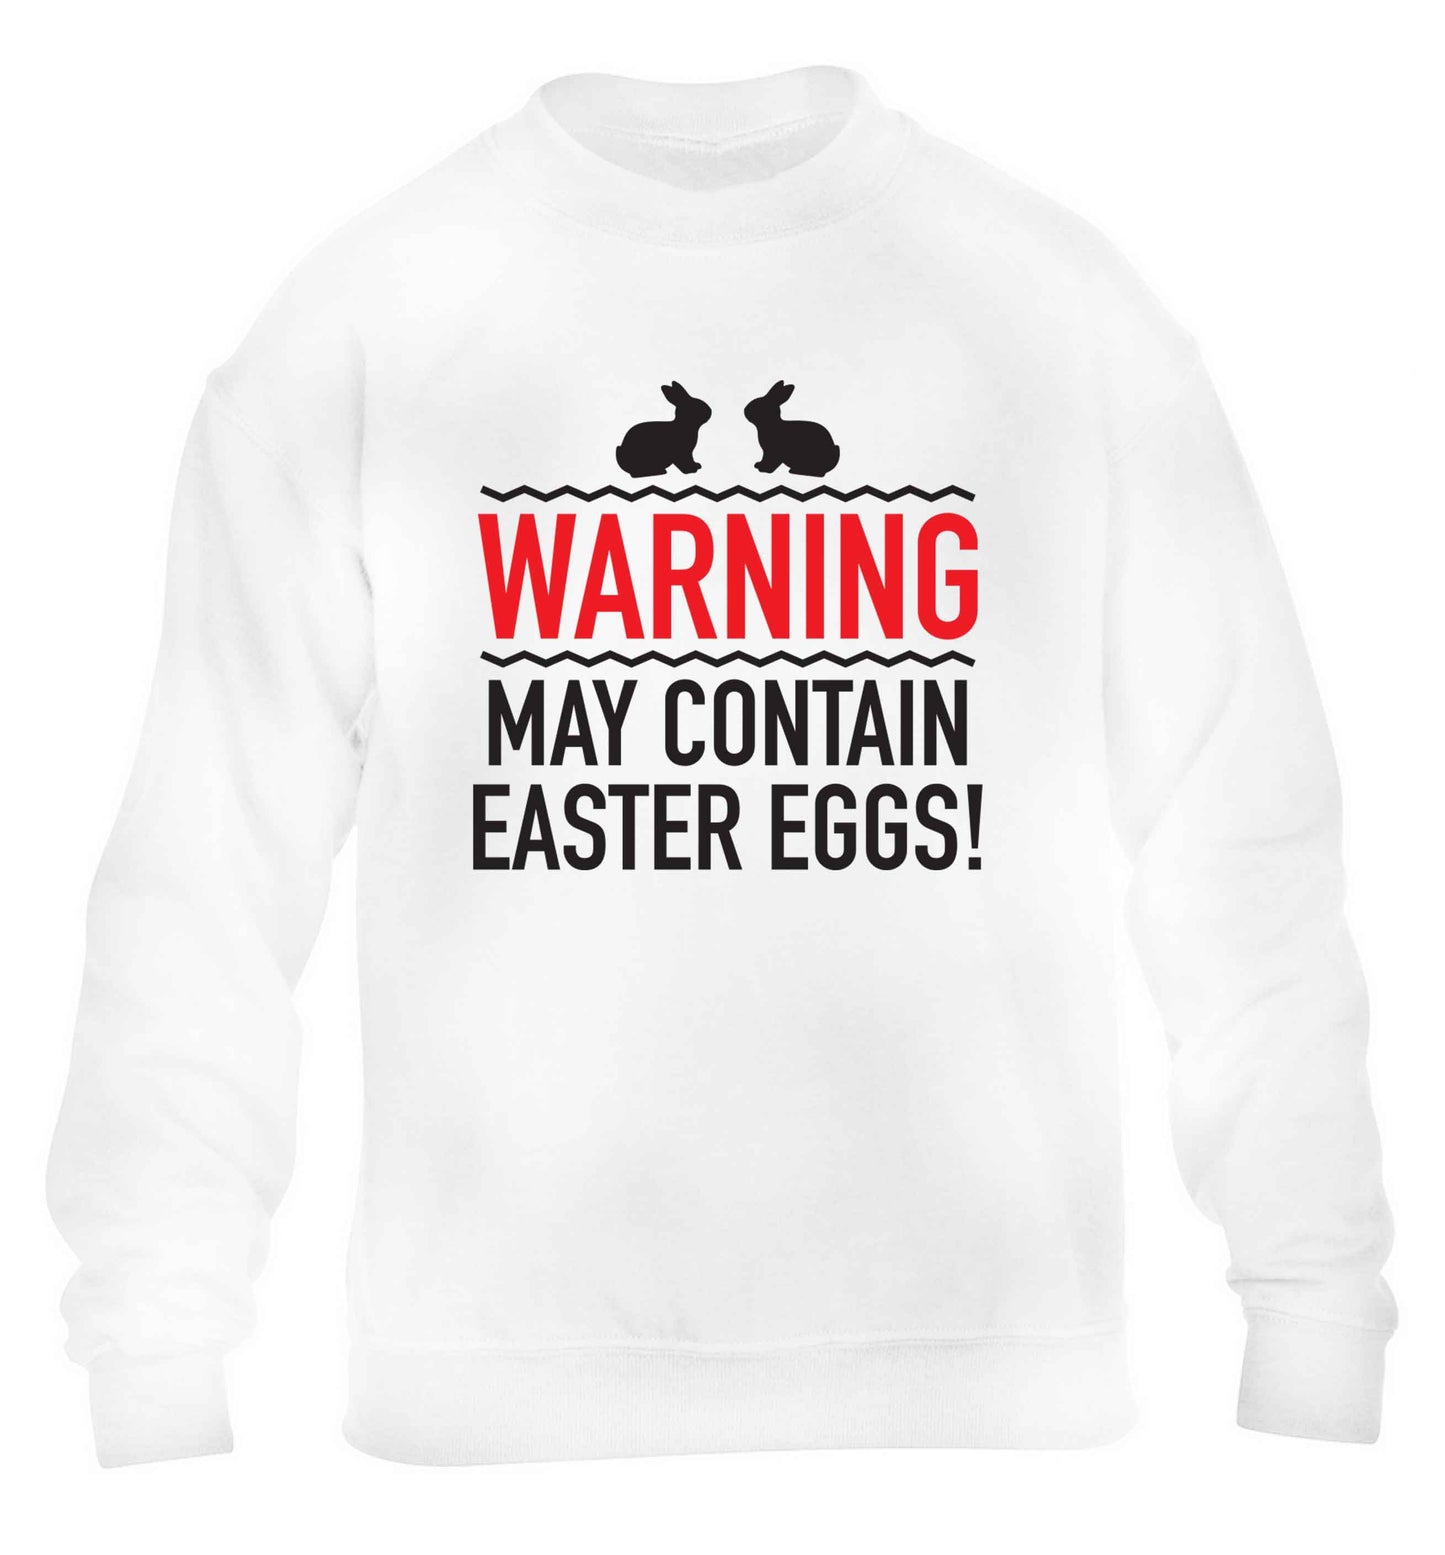 Warning may contain Easter eggs children's white sweater 12-13 Years